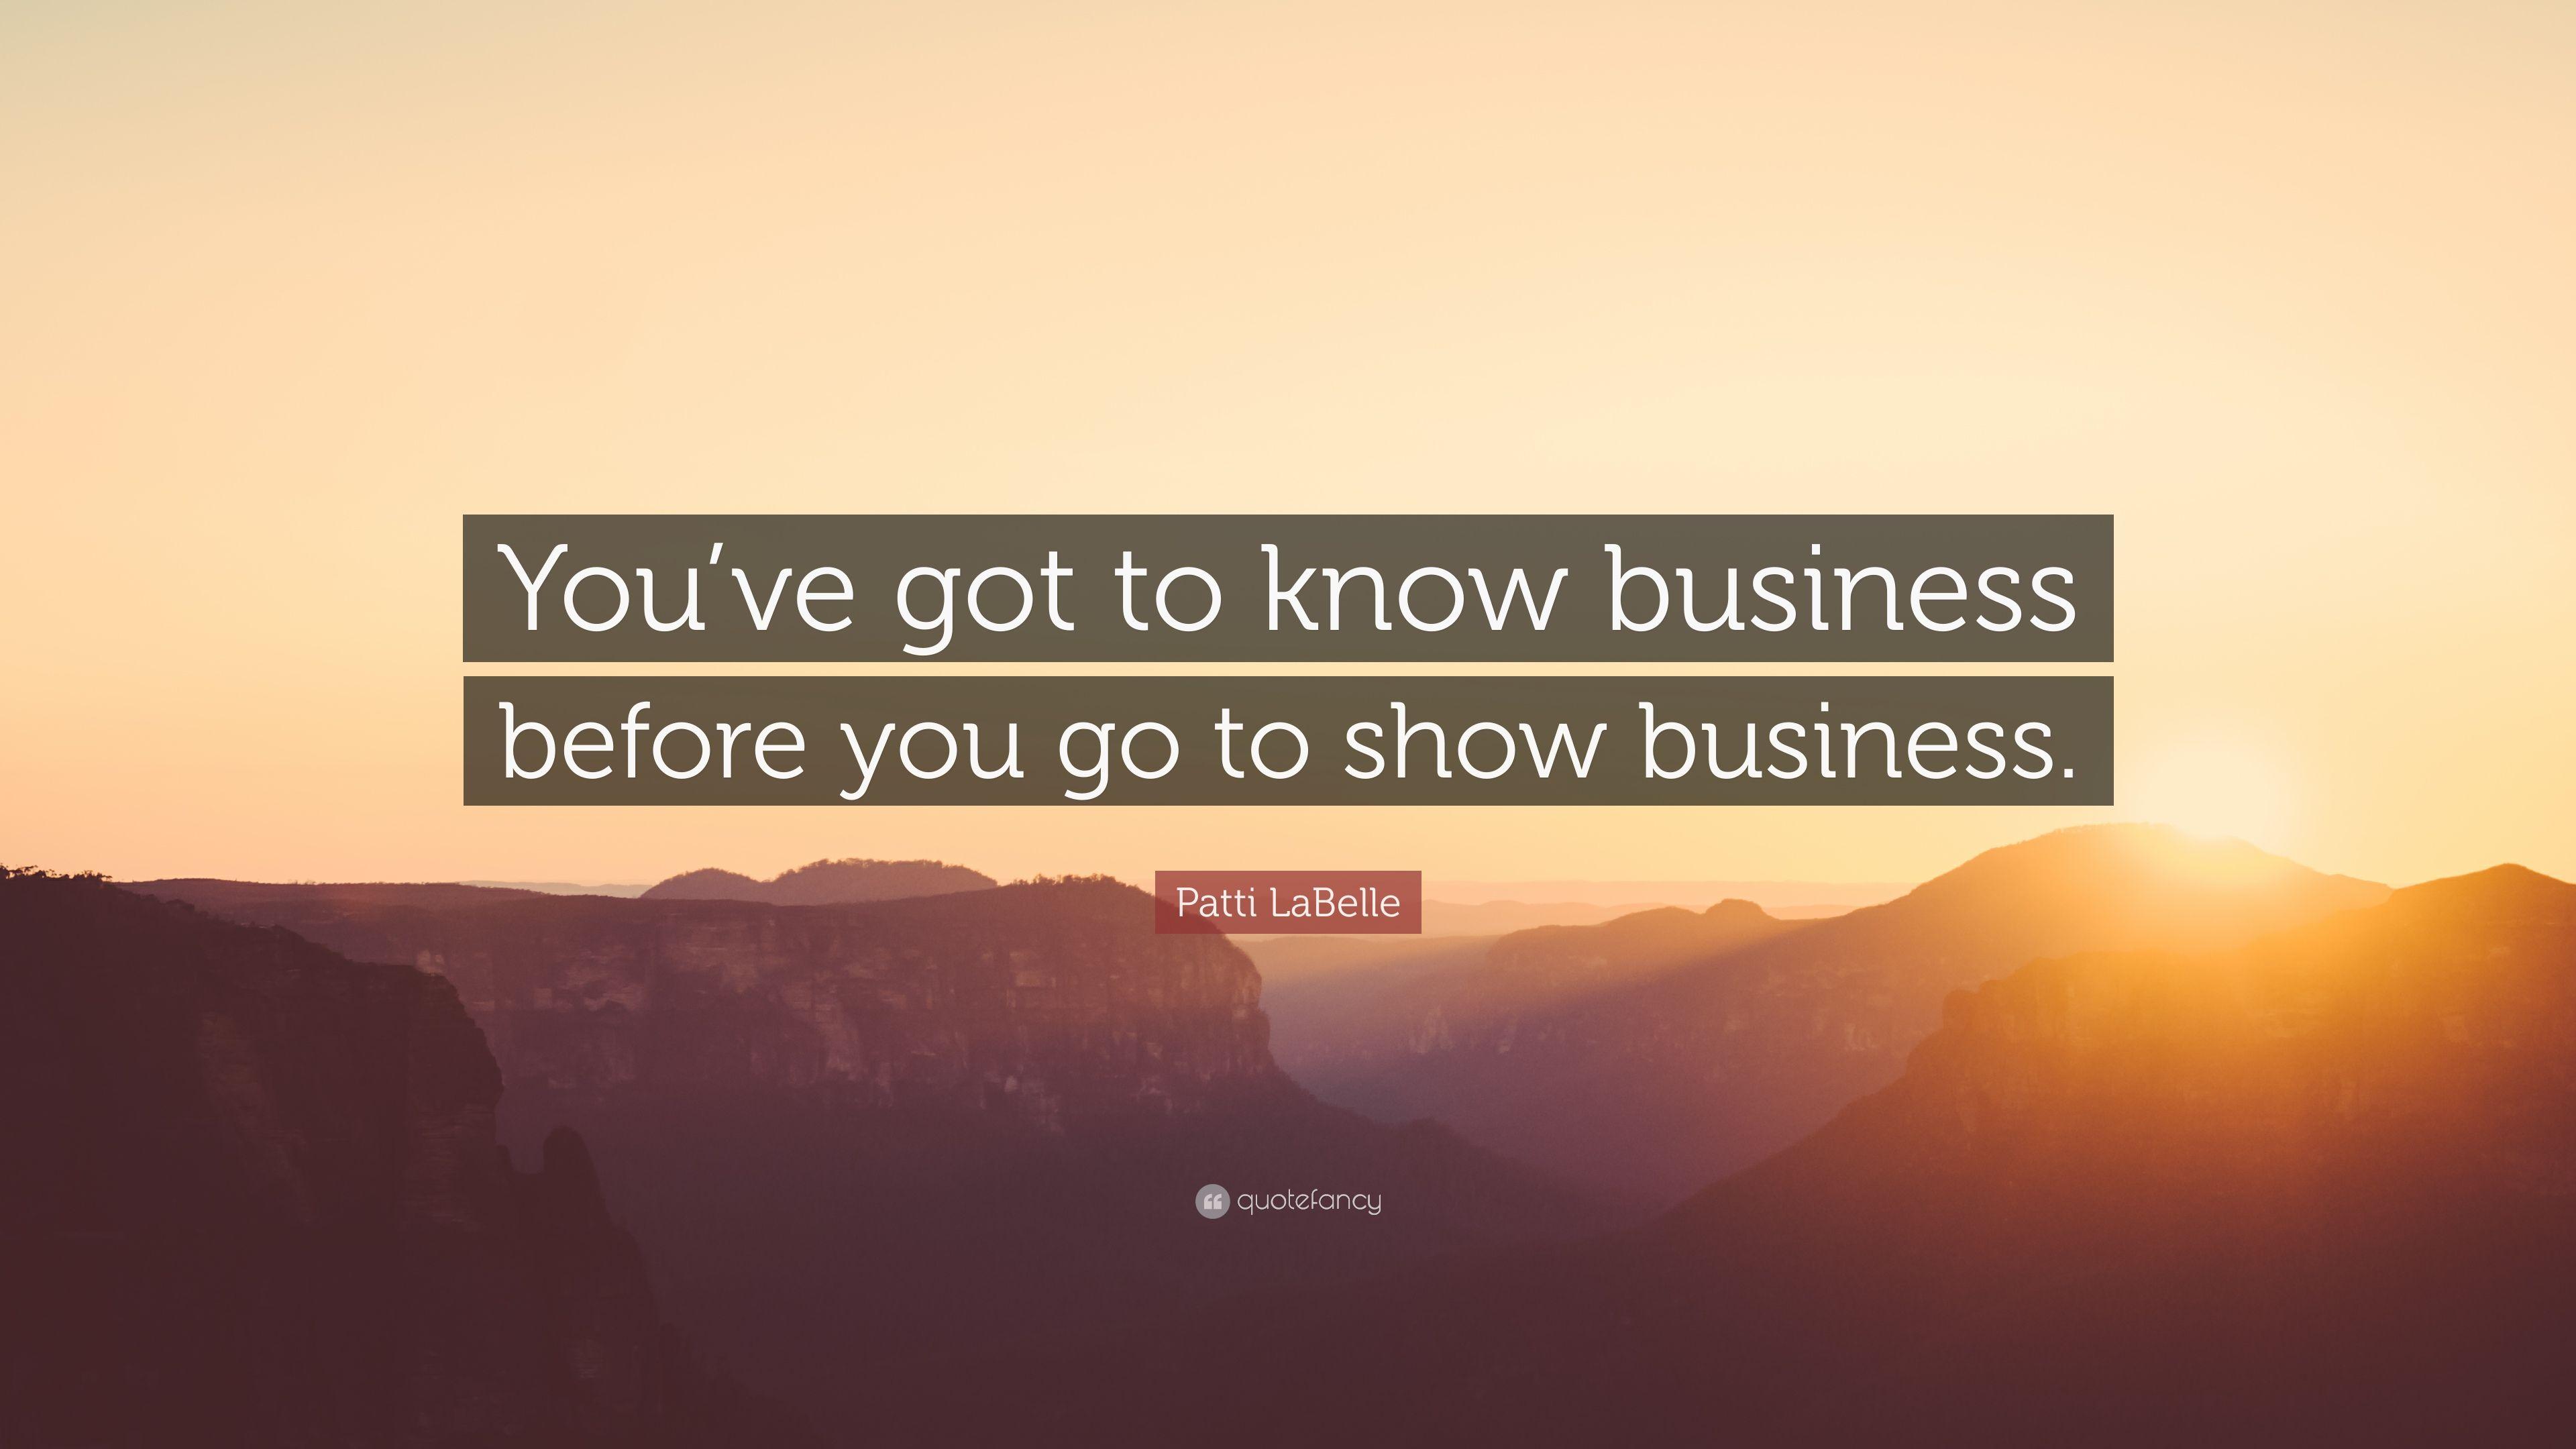 Patti LaBelle Quote: “You've got to know business before you go to